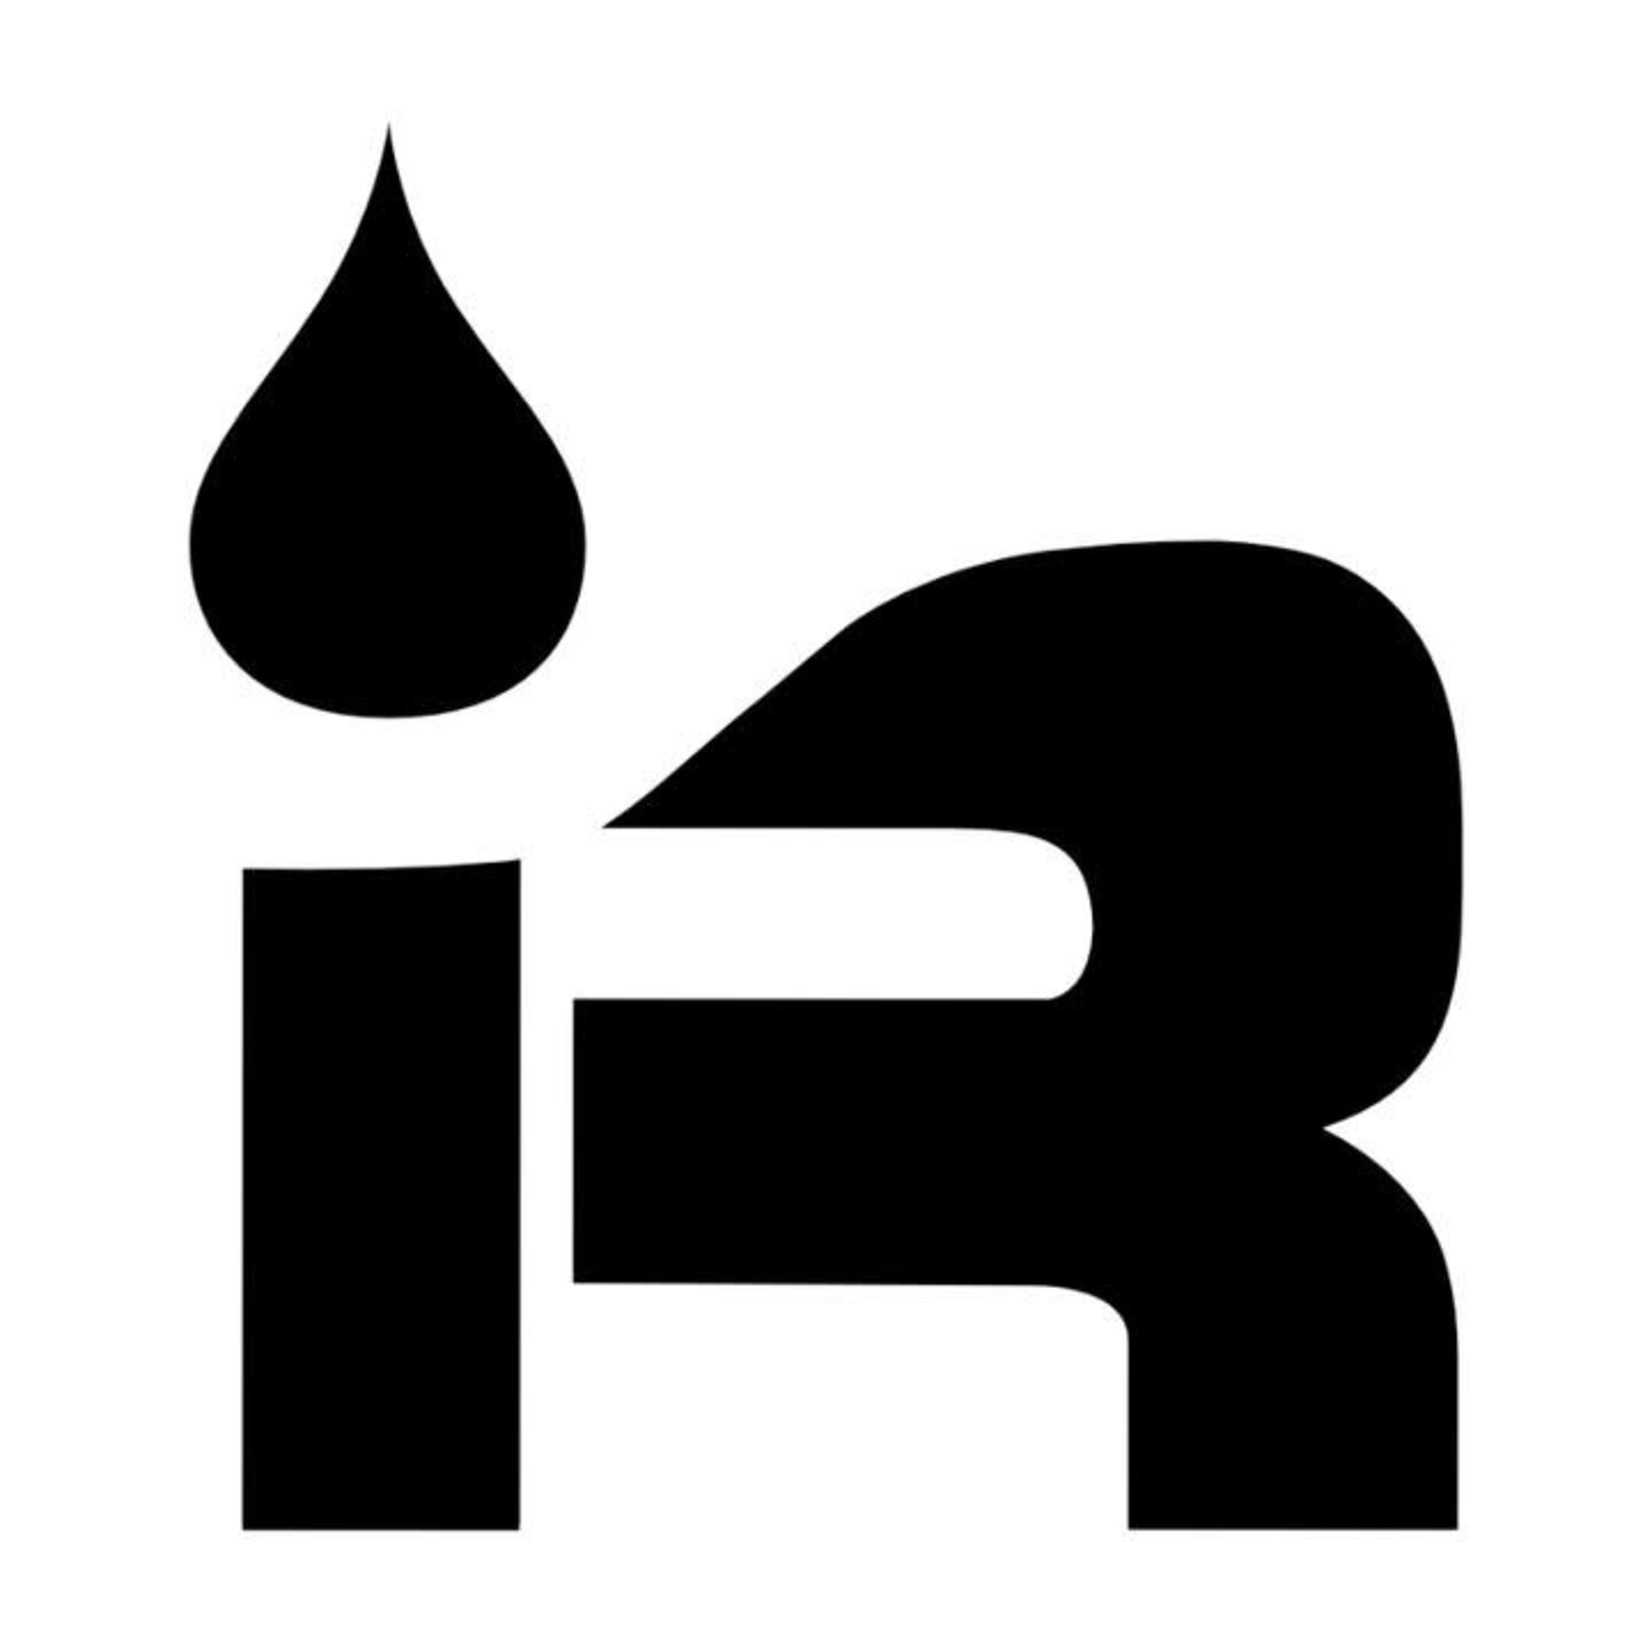 Immersion Research IR Diecut Decal 3"